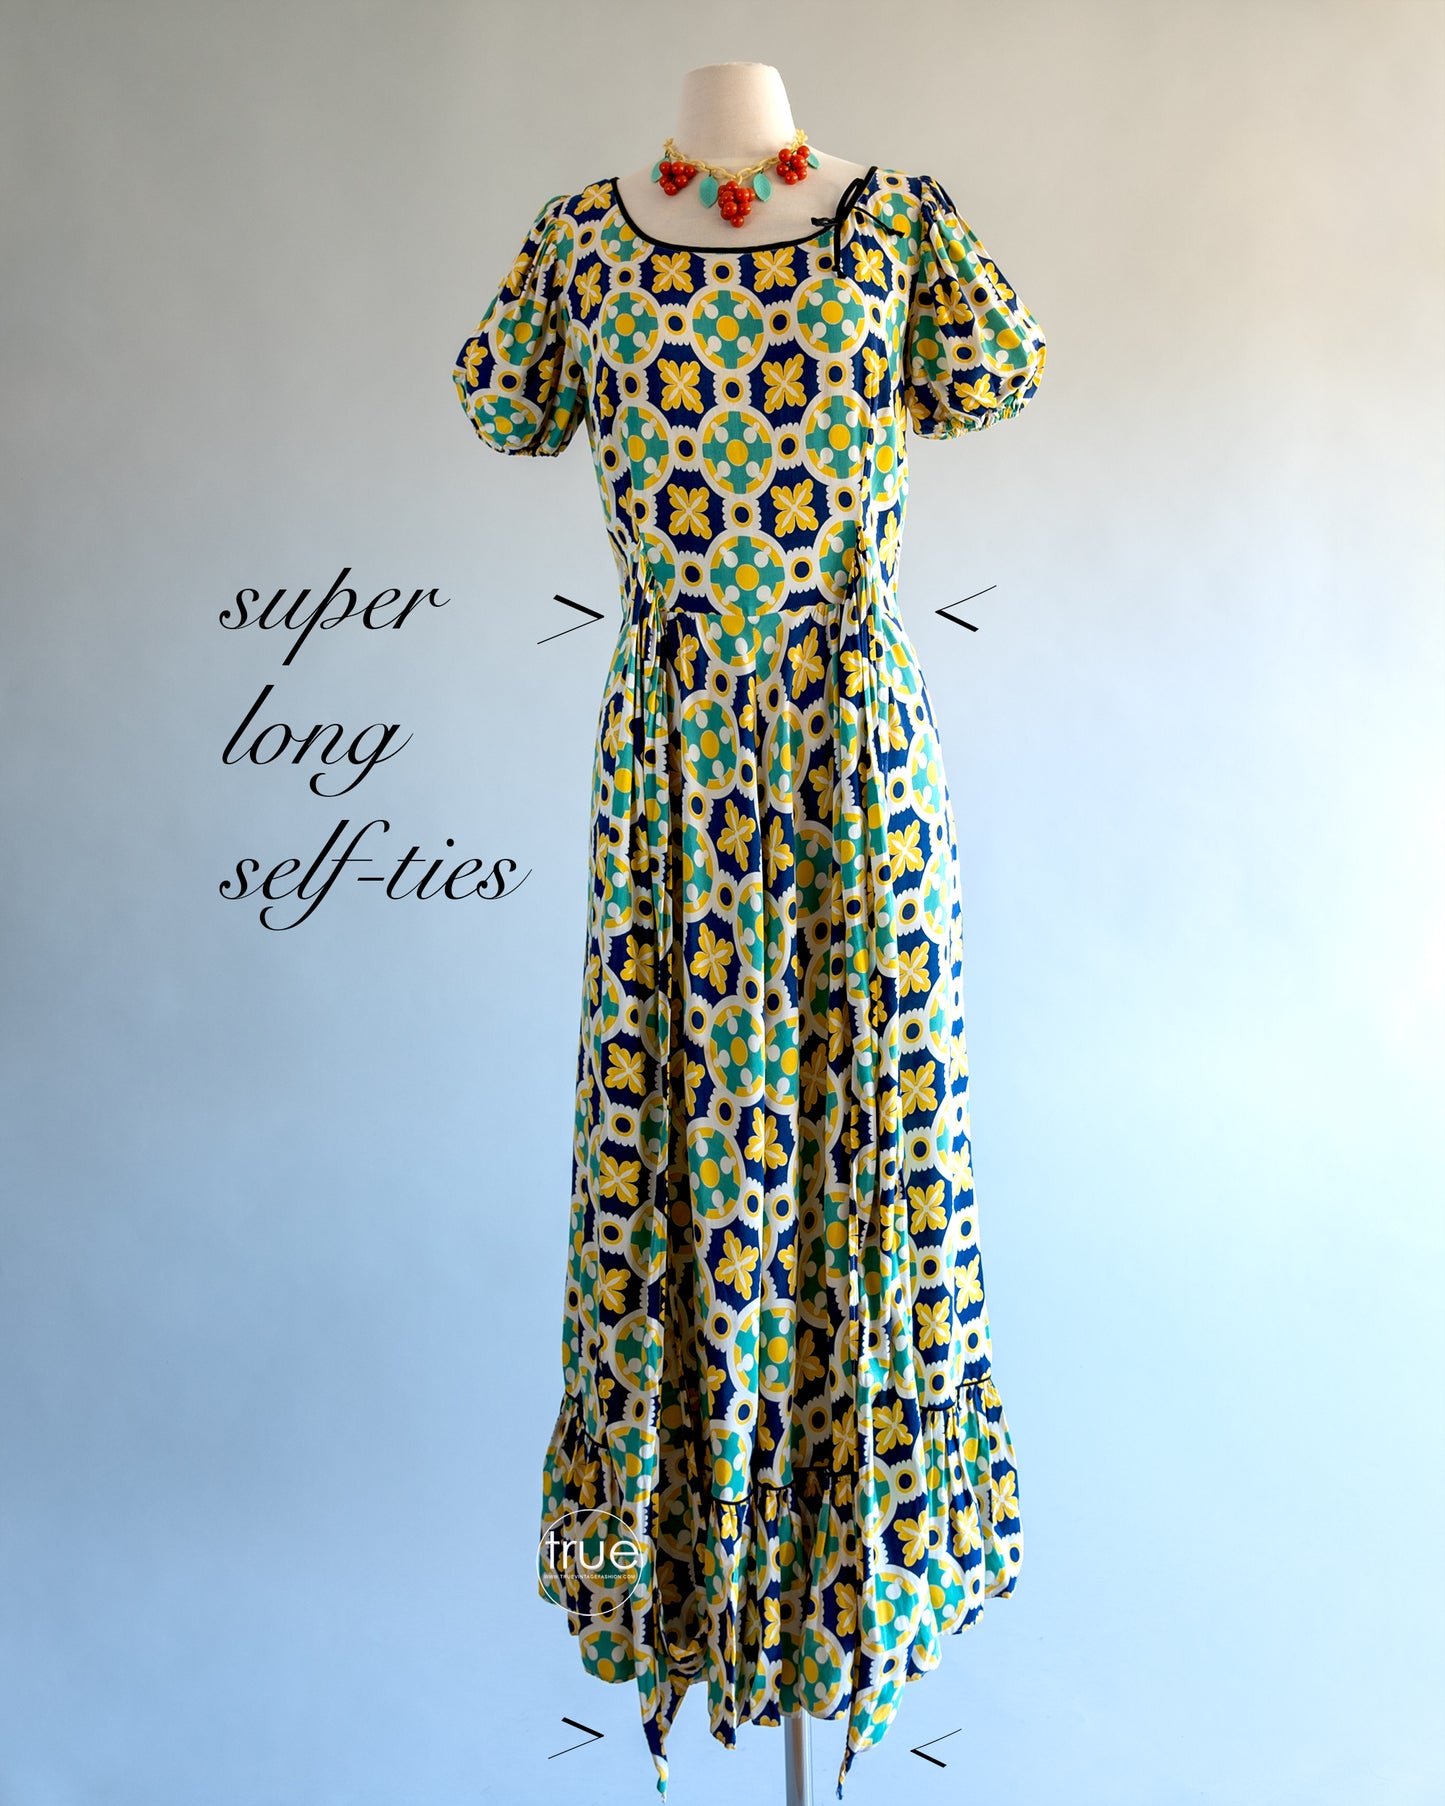 vintage 1930’s - early 1940’s dress ...Dale Hunter of California midi dress with a fun rounded and flounced hem